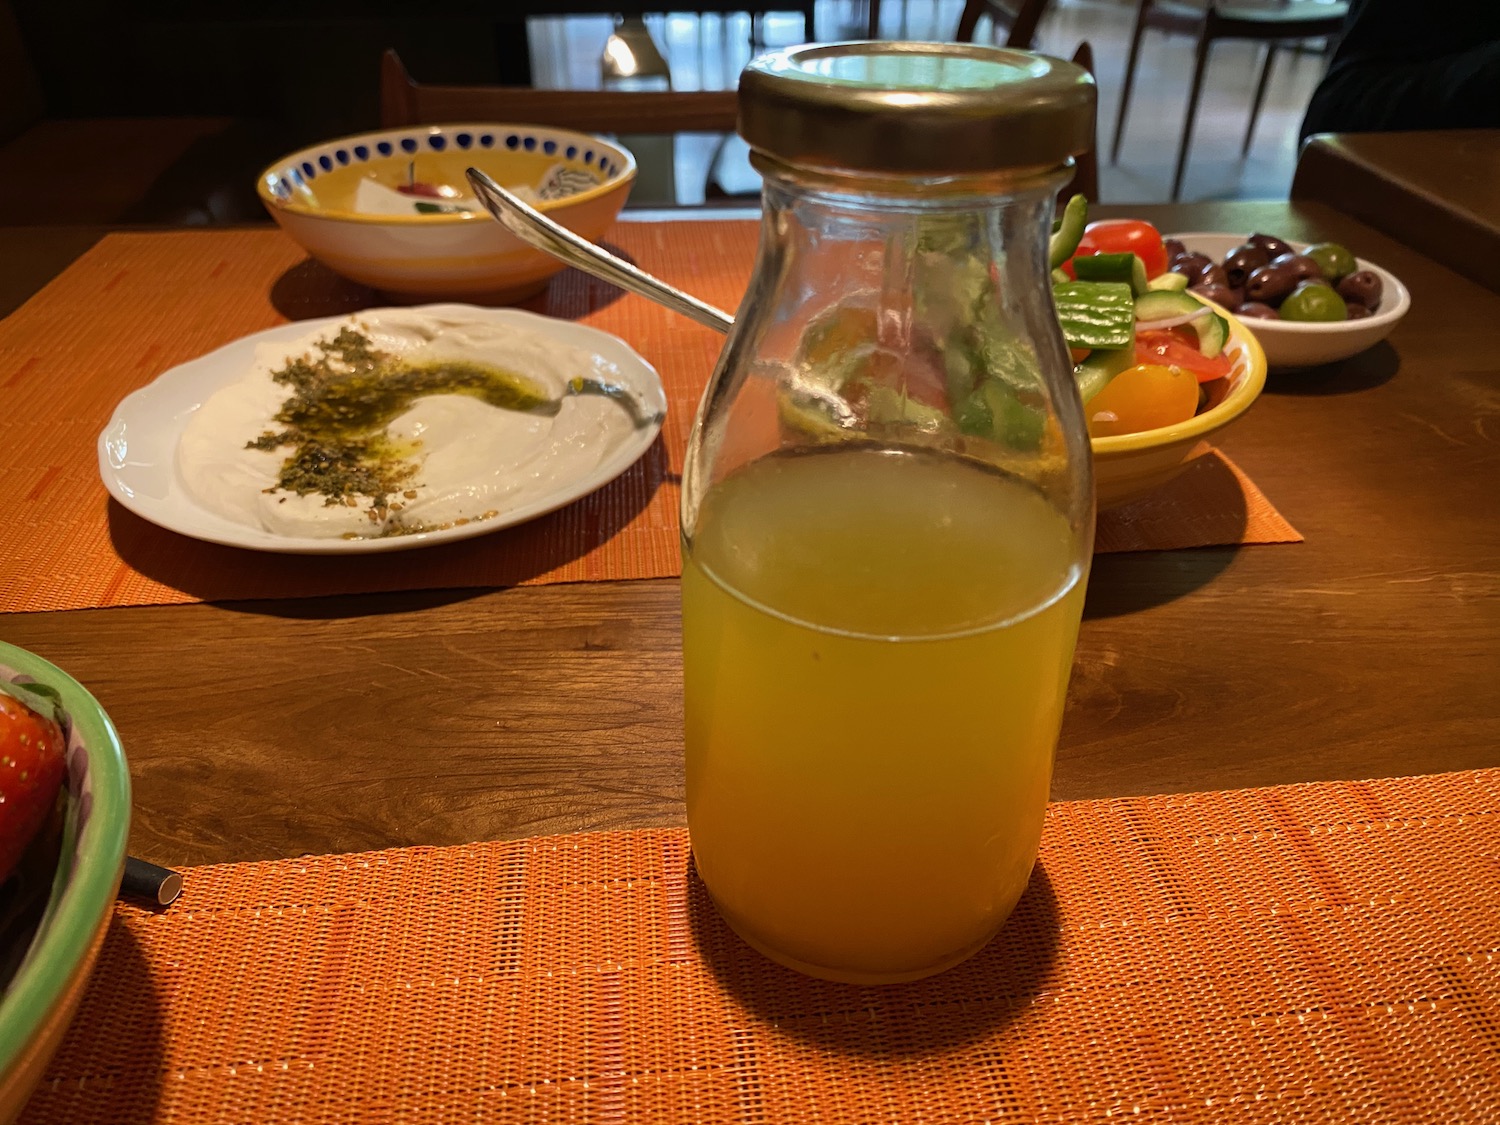 a glass bottle with yellow liquid on a table with a plate of food